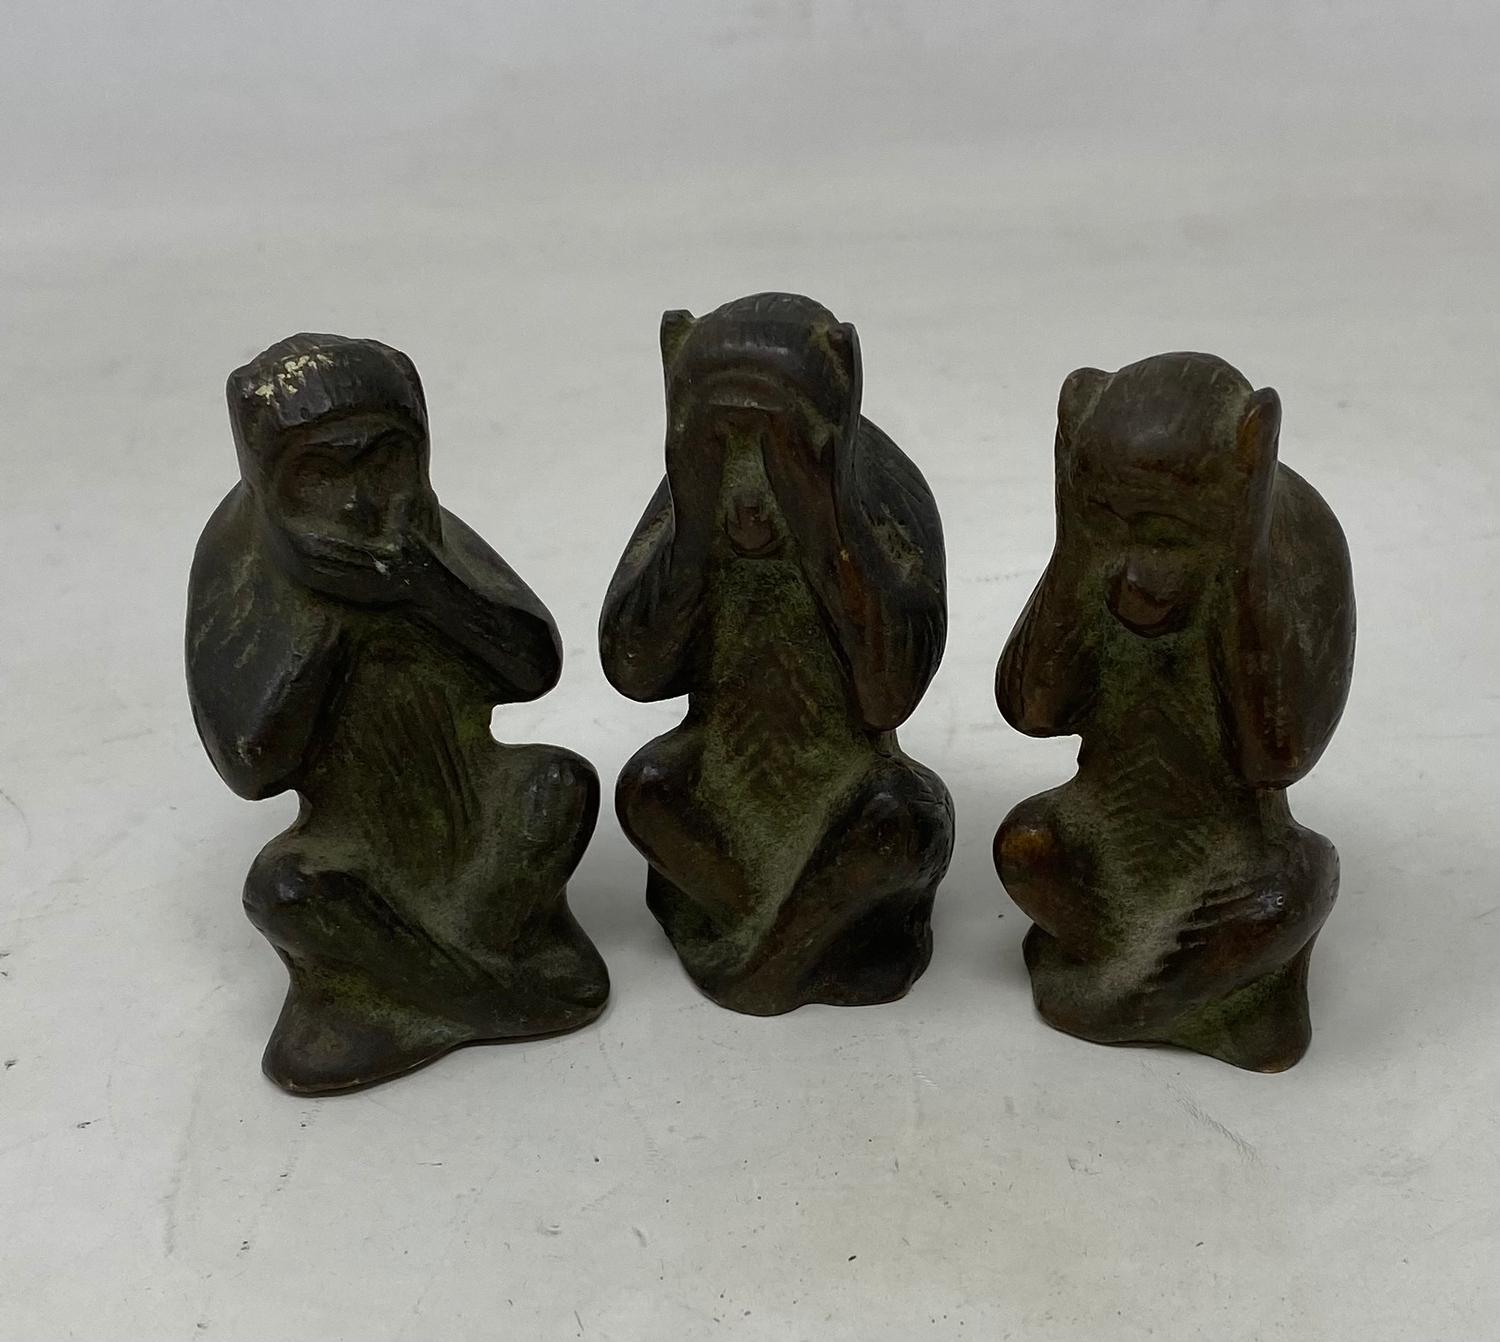 A set of three bronze monkeys, see no evil, hear no evil, speak no evil, on wooden stand, and